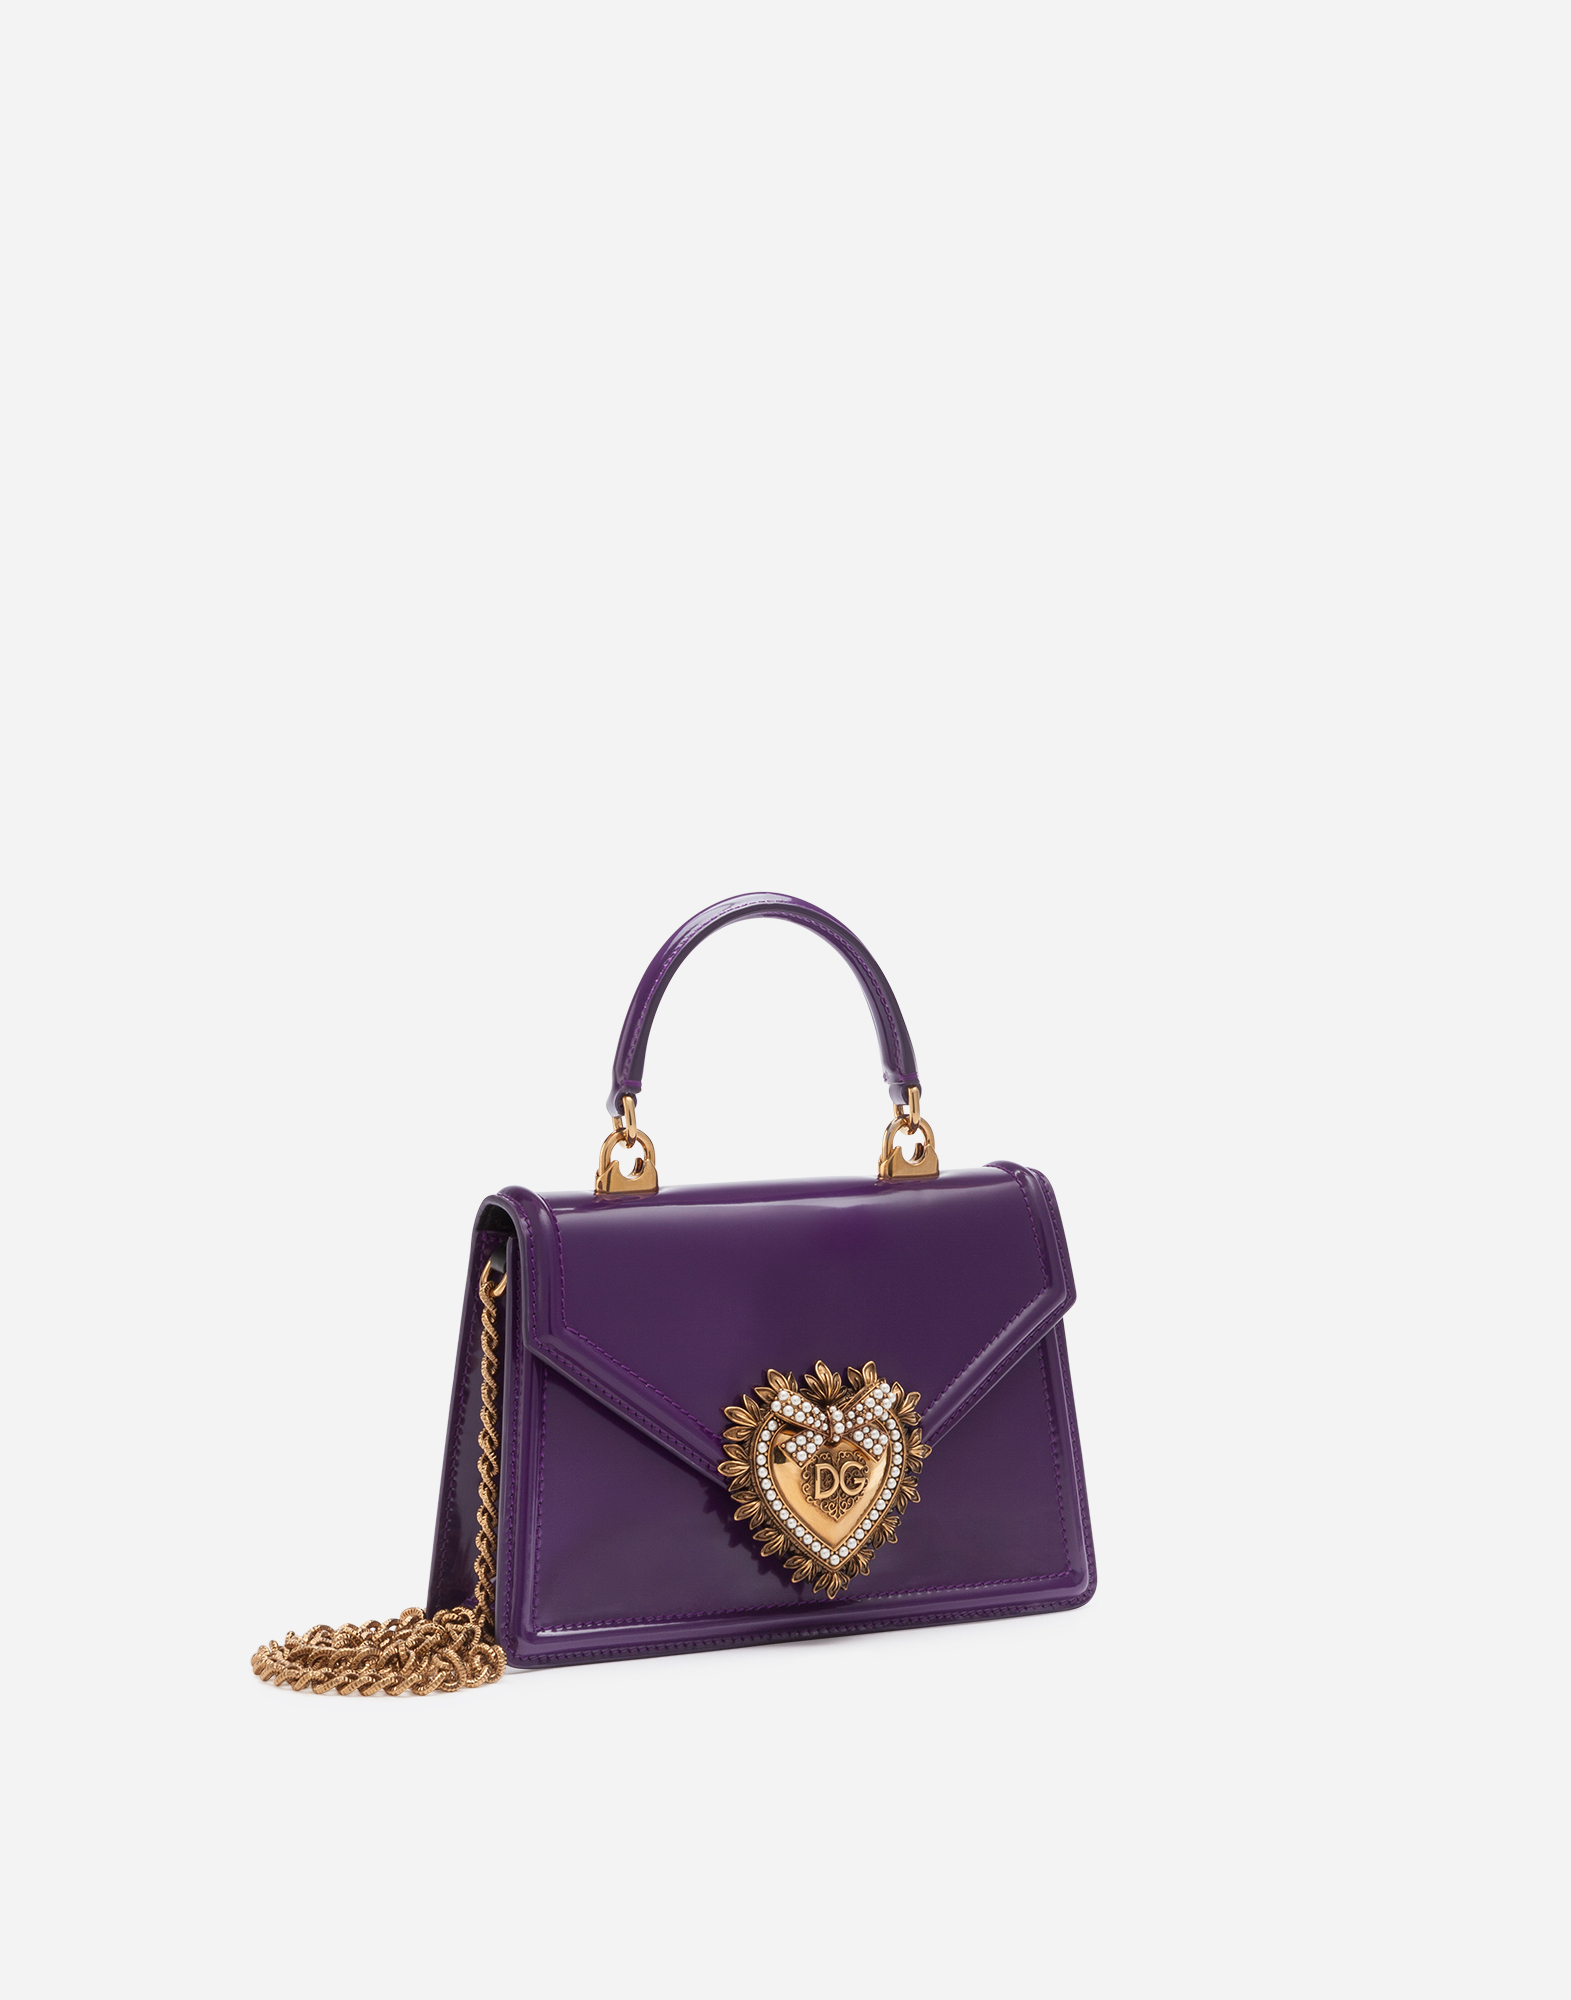 dolce and gabbana small devotion bag